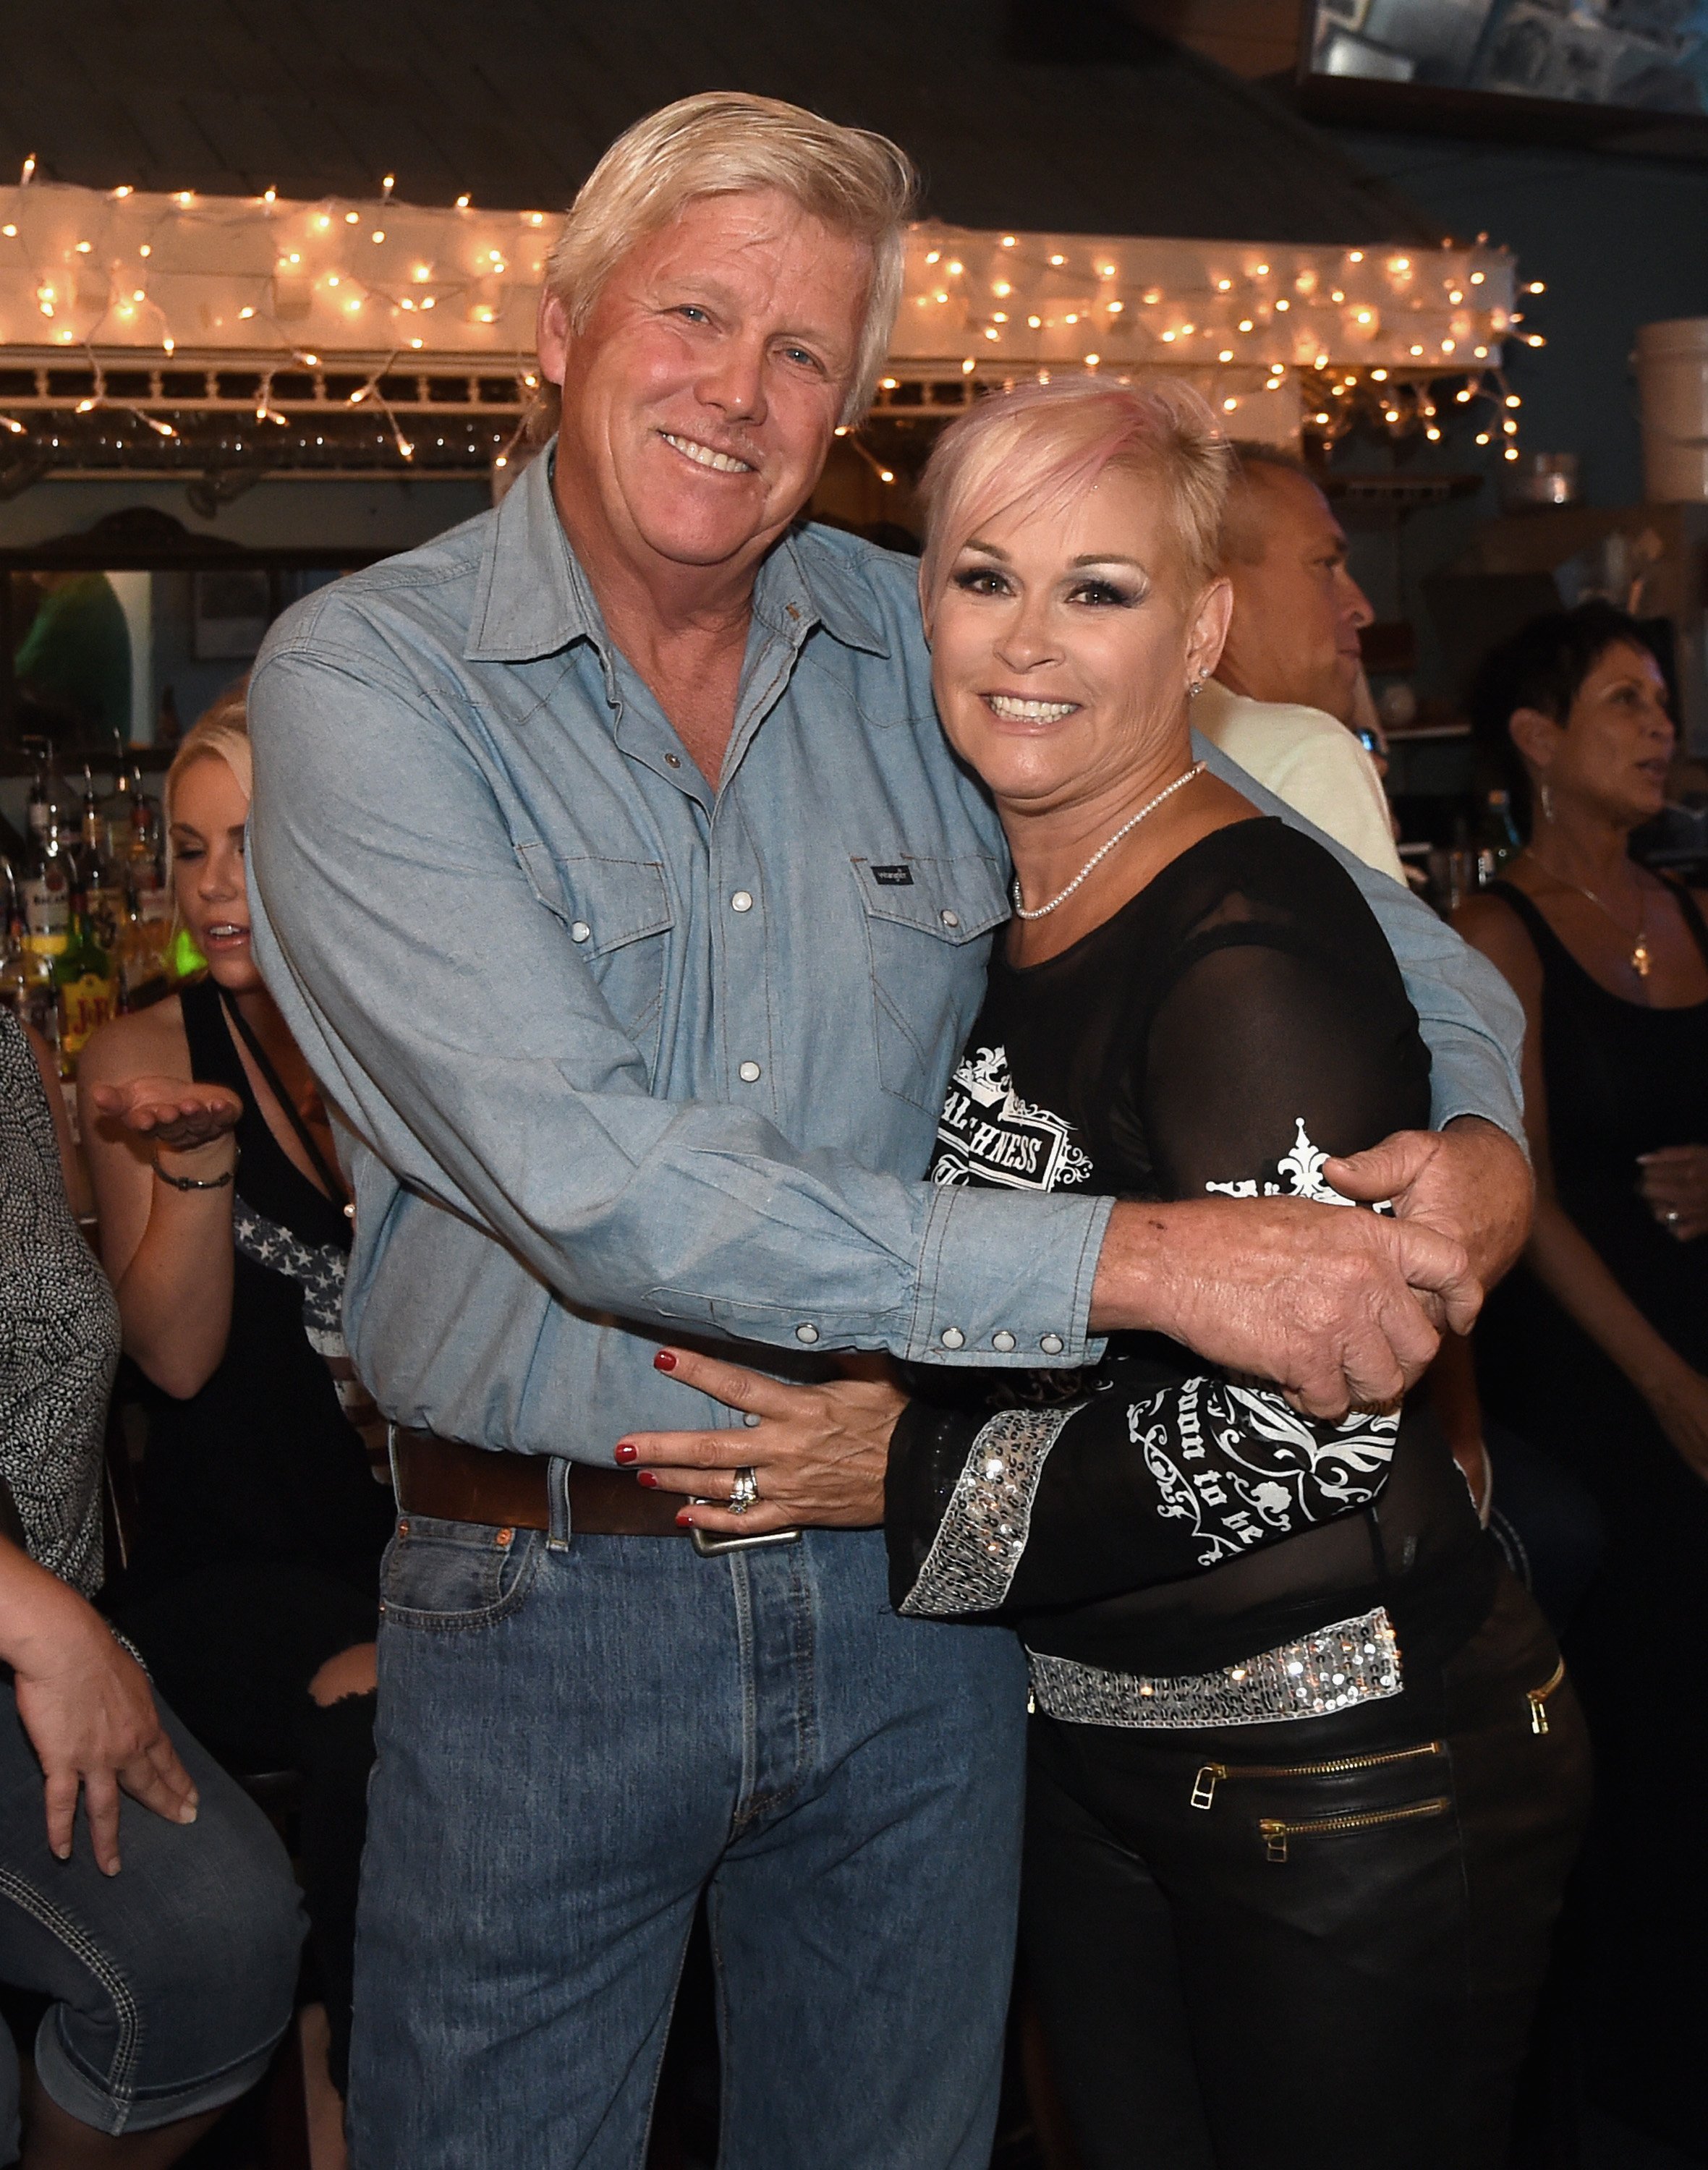 Lorrie Morgan and Randy White at "An Intimate Night With The Morgans" concert, August 2017 | Source: Getty Images